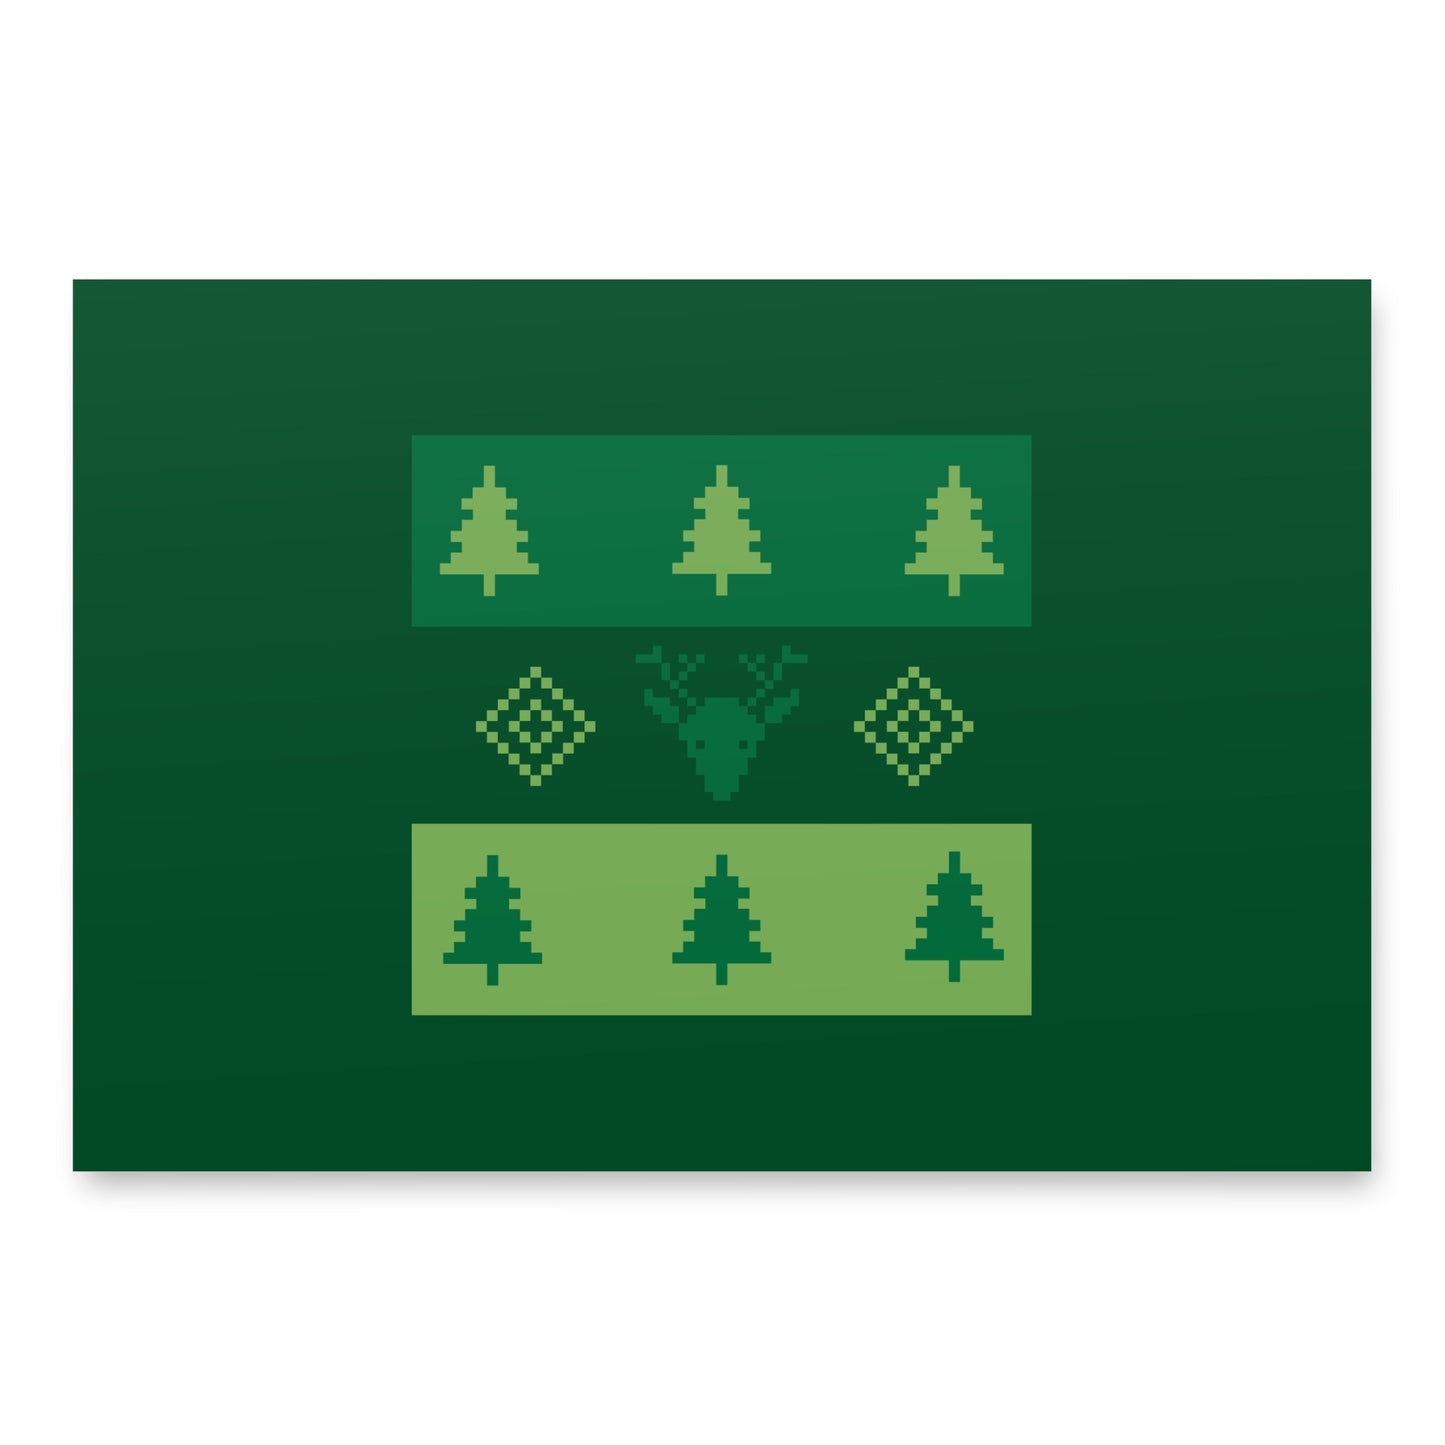 Wrapping Paper Sheets - Green Forest Ugly Sweater Print